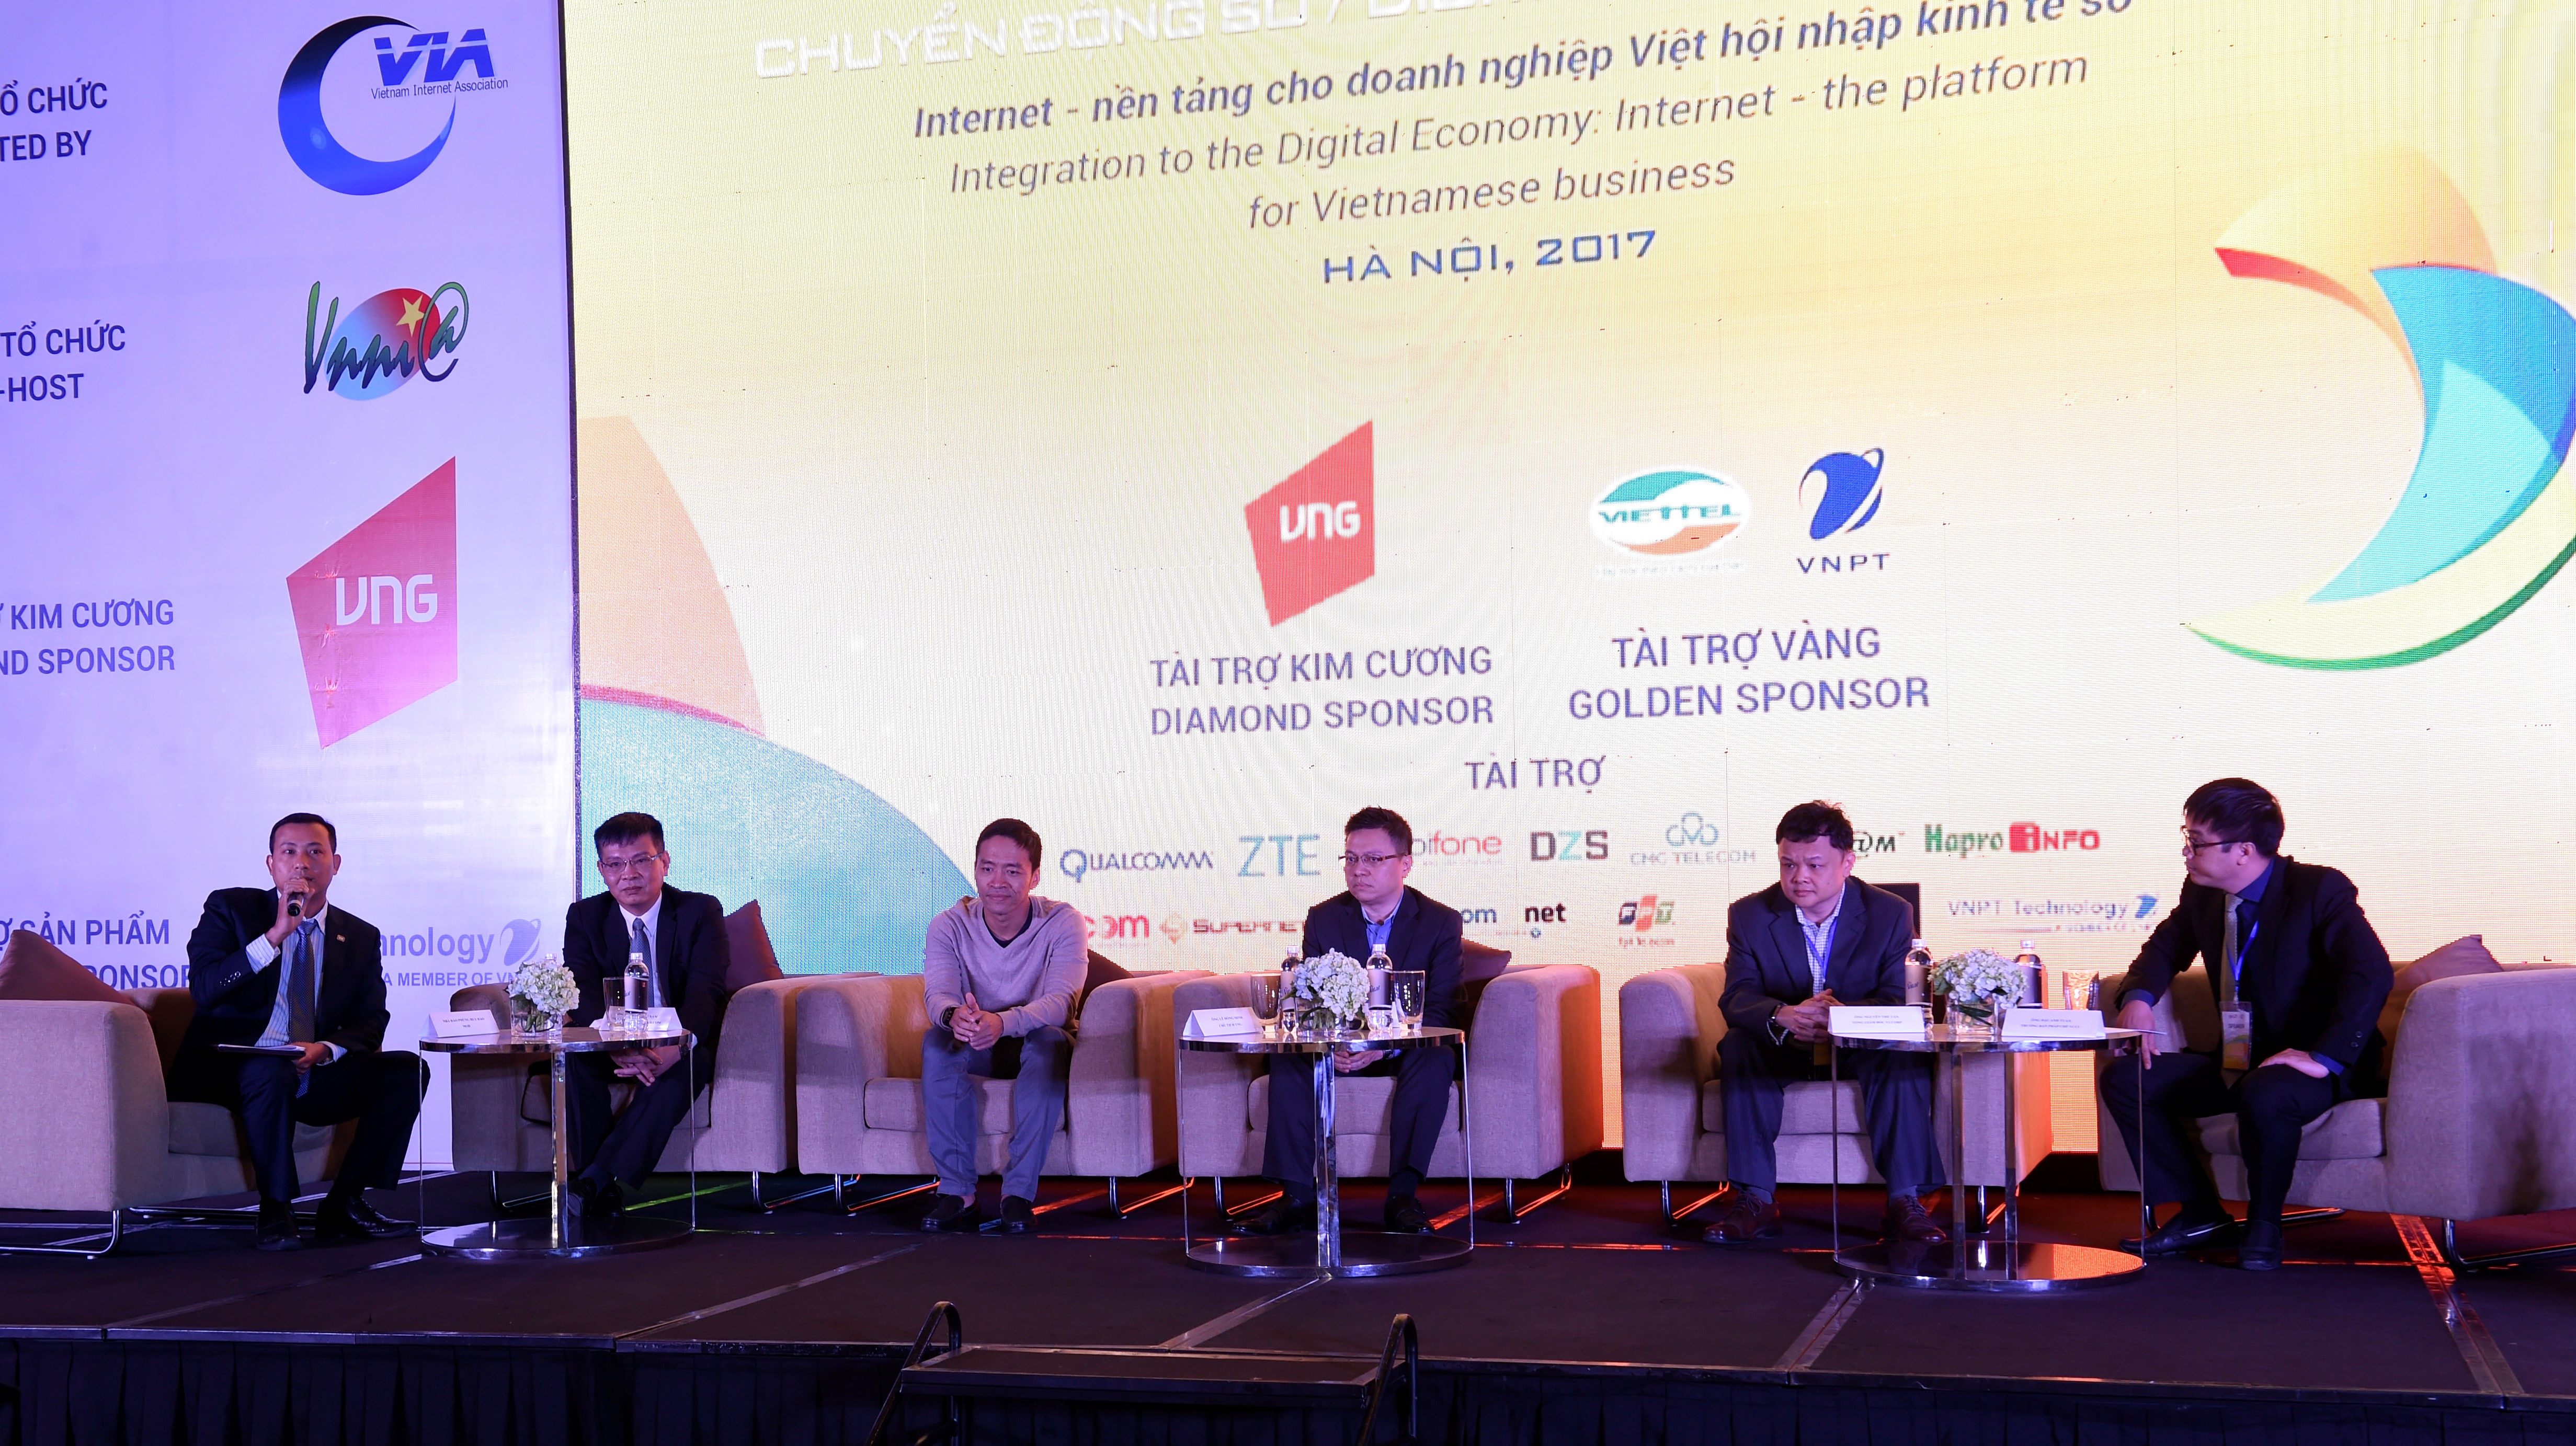 Internet Day 2017: a platform for Vietnamese businesses to integrate into digital economy